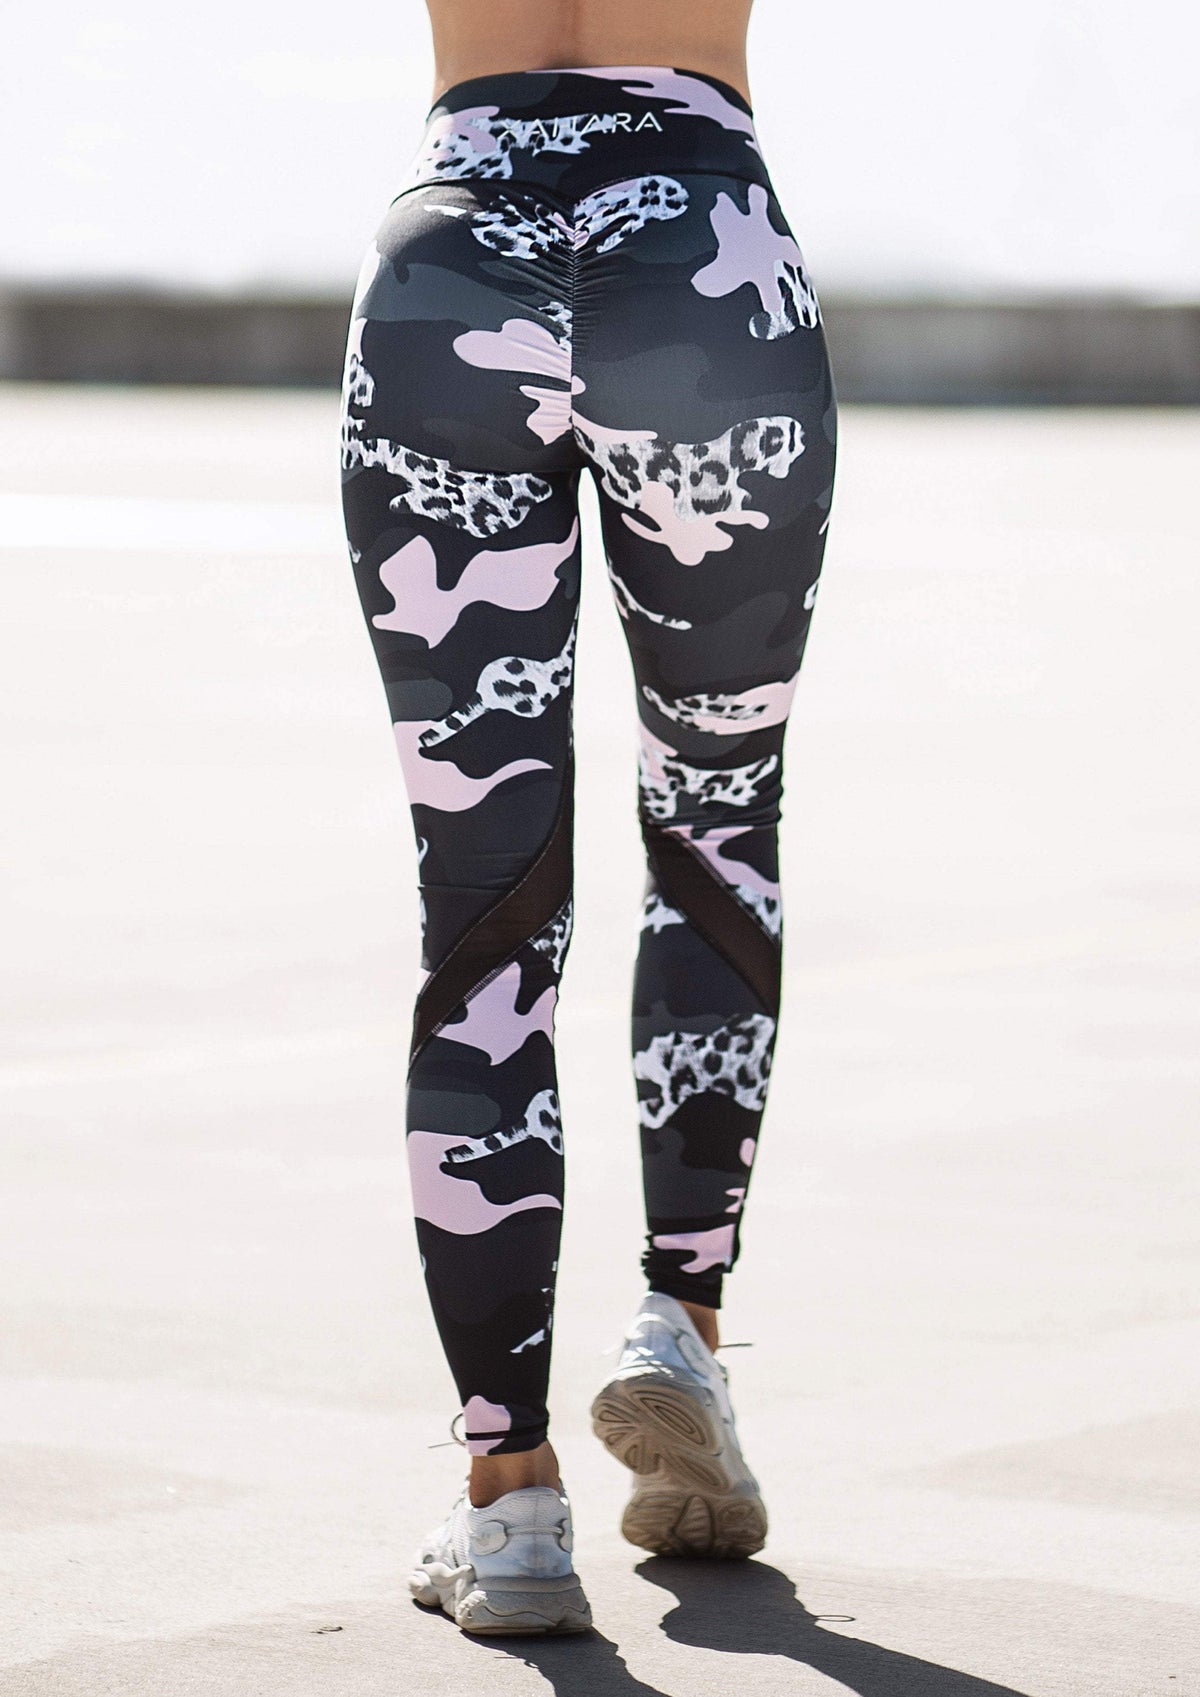 Bootylicious Dusty Pink Camo Legging — Be Activewear